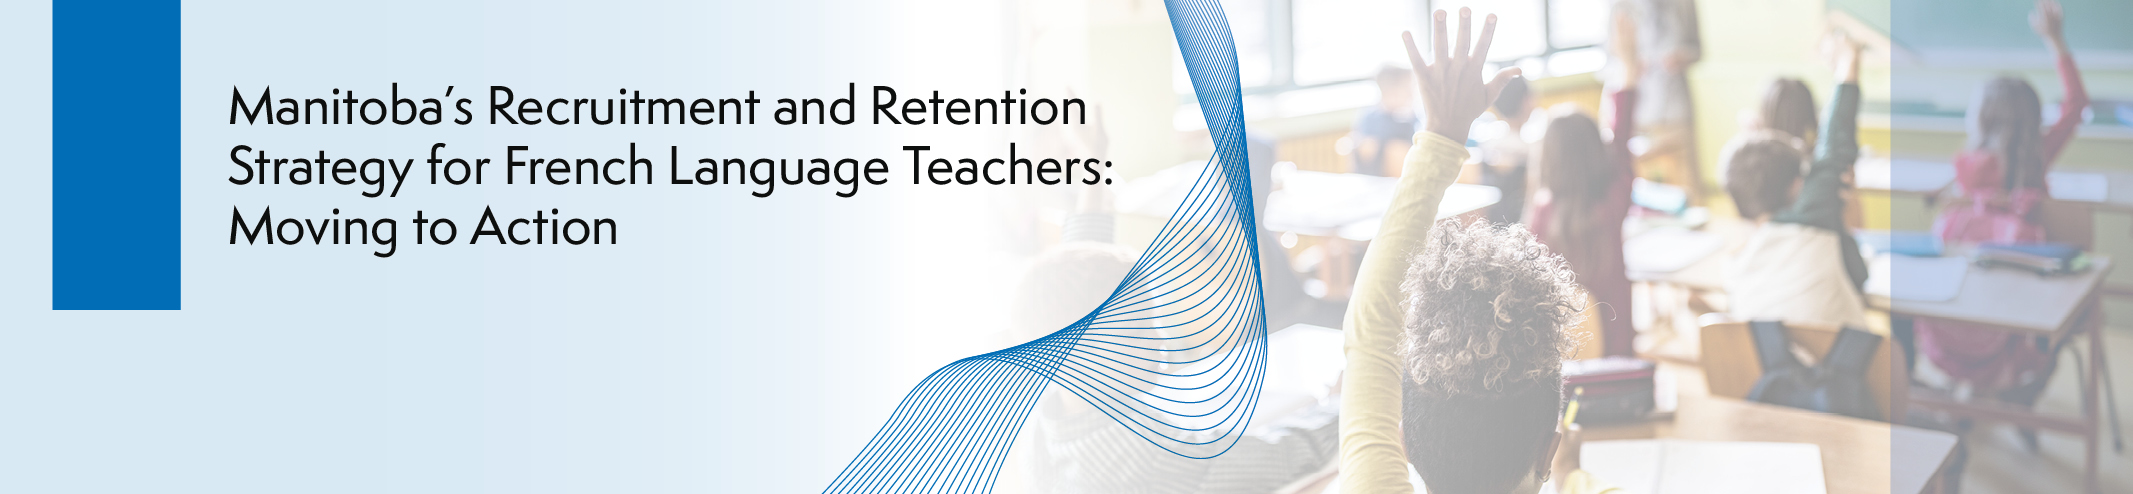 Manitoba's Recruitment and Retention Strategy for French Language Teachers: Moving to Action